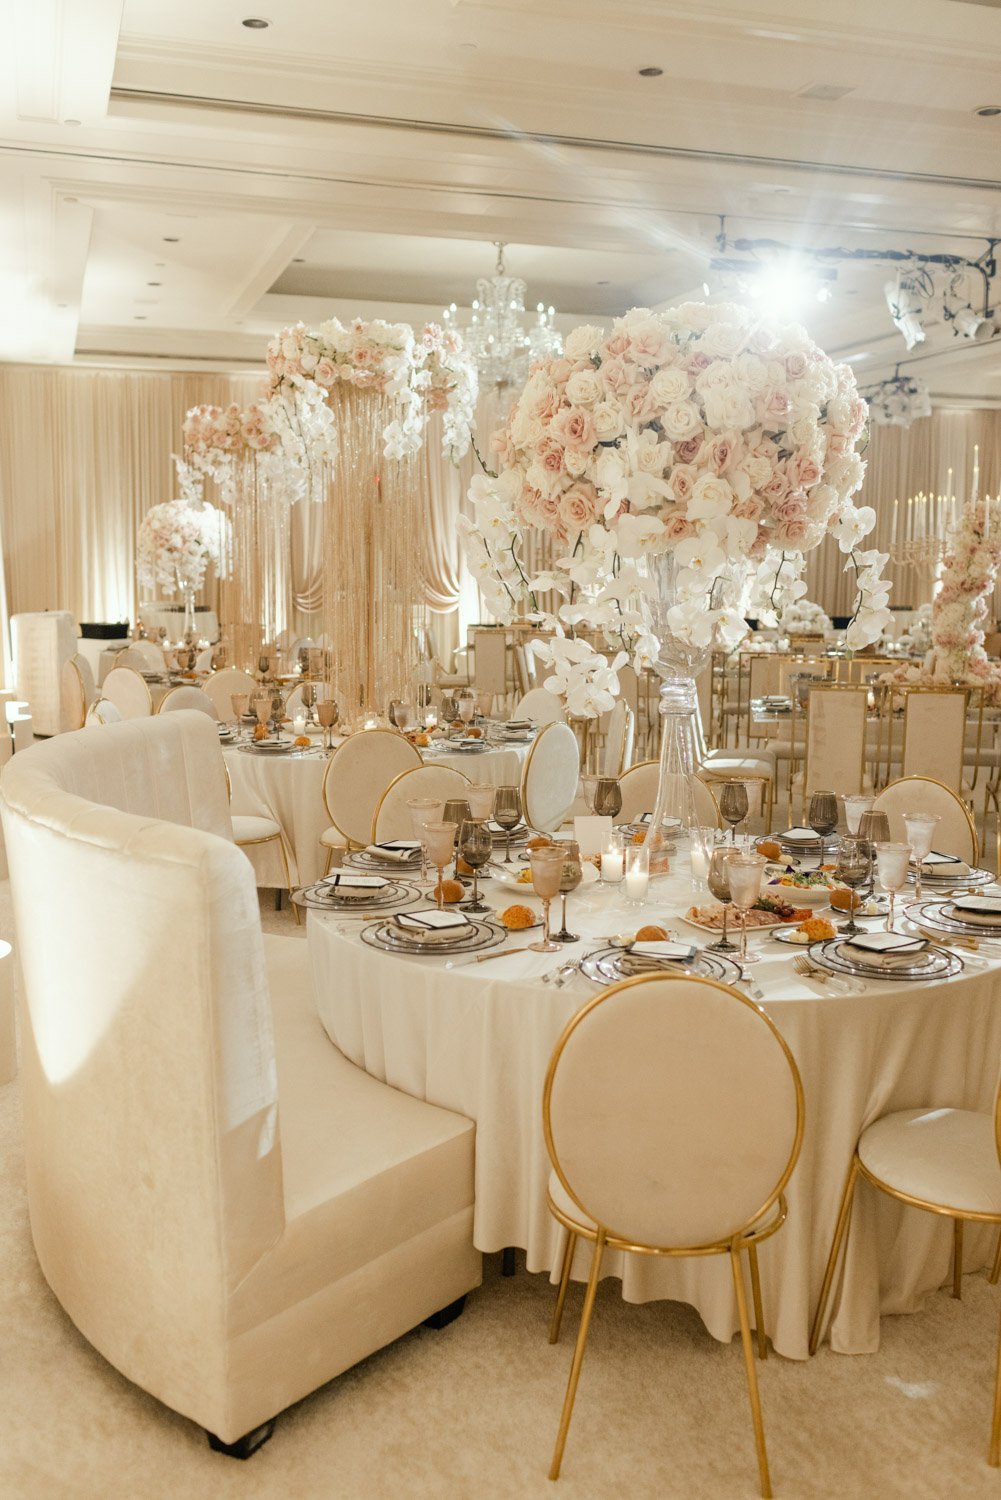 Pale pink and cream rose tall table centerpieces highlight crystal and gold accents at the Ritz-Carlton Laguna Niguel